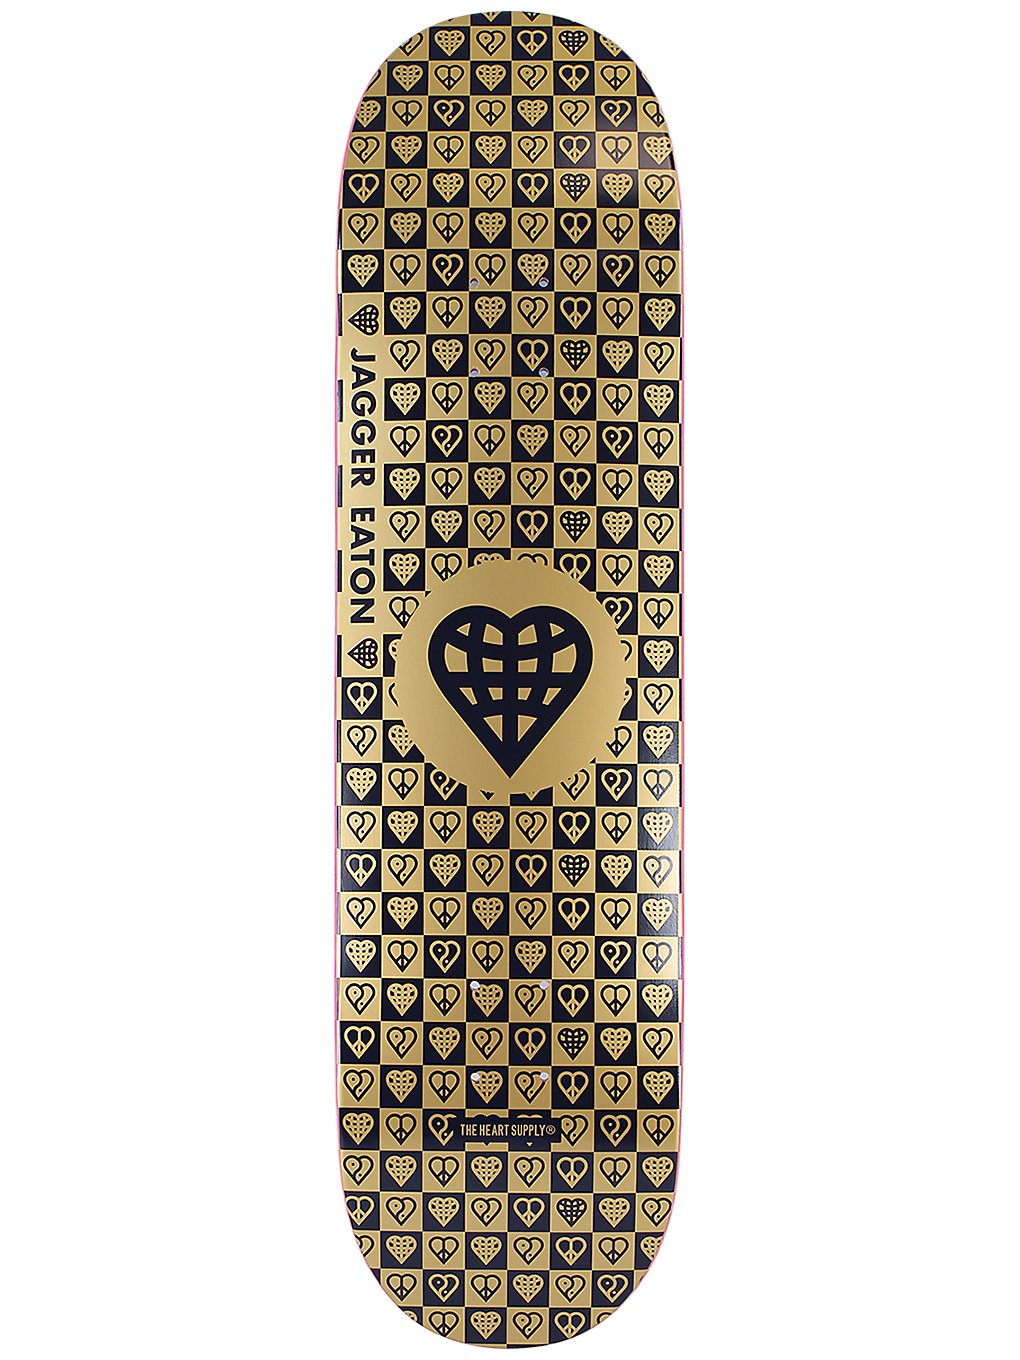 Heart Supply Jagger Eaton Trinity 8.25 Skateboard Deck gold foil with raised ink